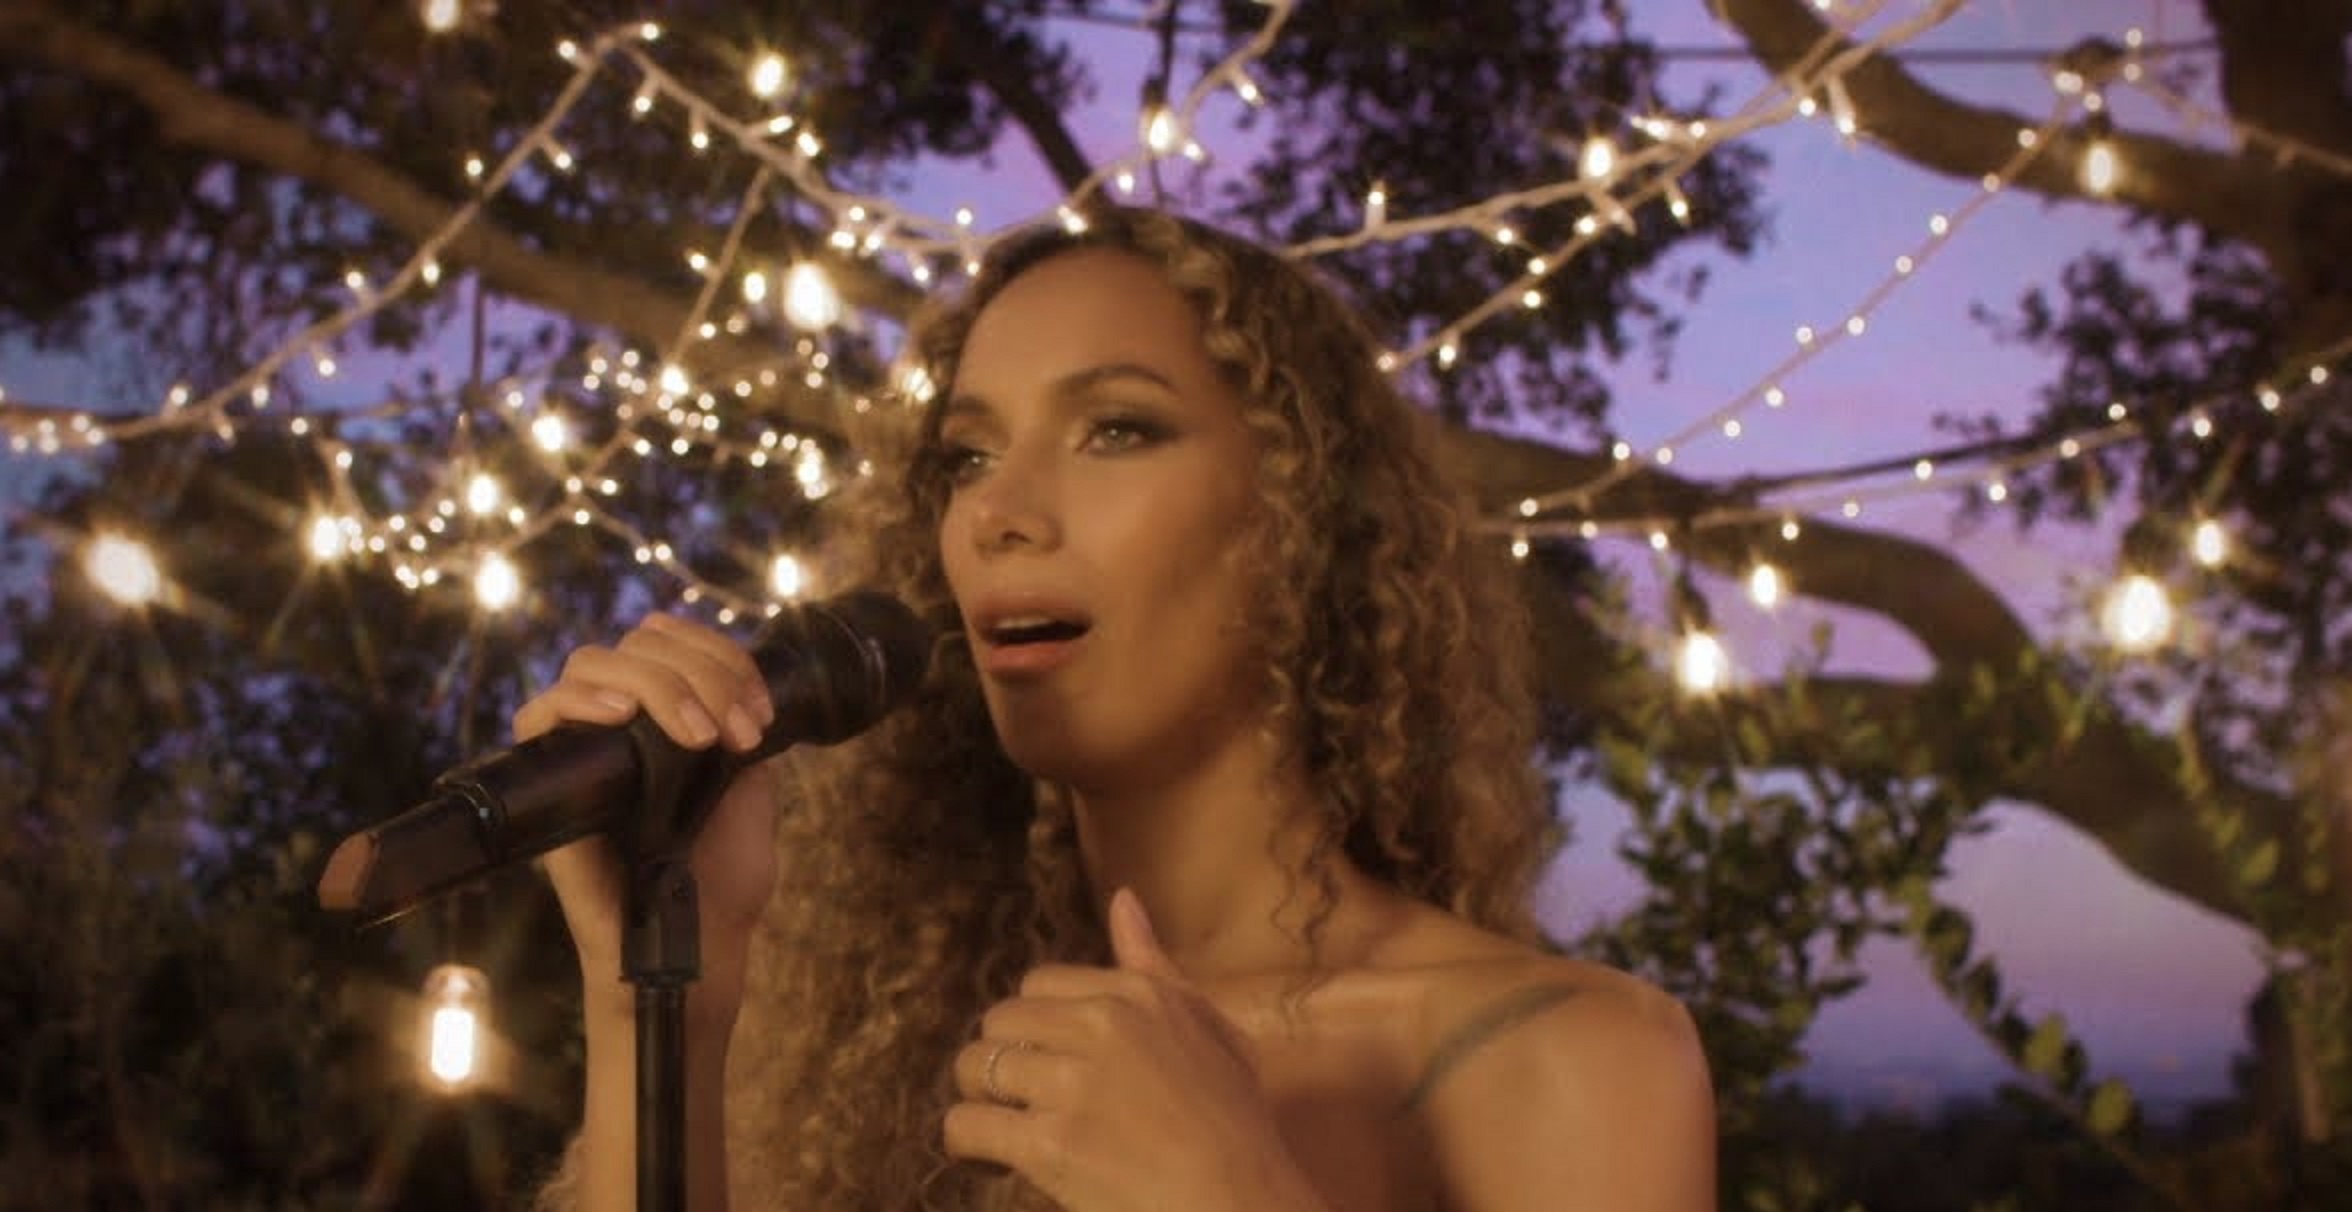 Watch: Leona Lewis Stuns With New Live Performance Of Opera Classic, ‘Ave Maria’